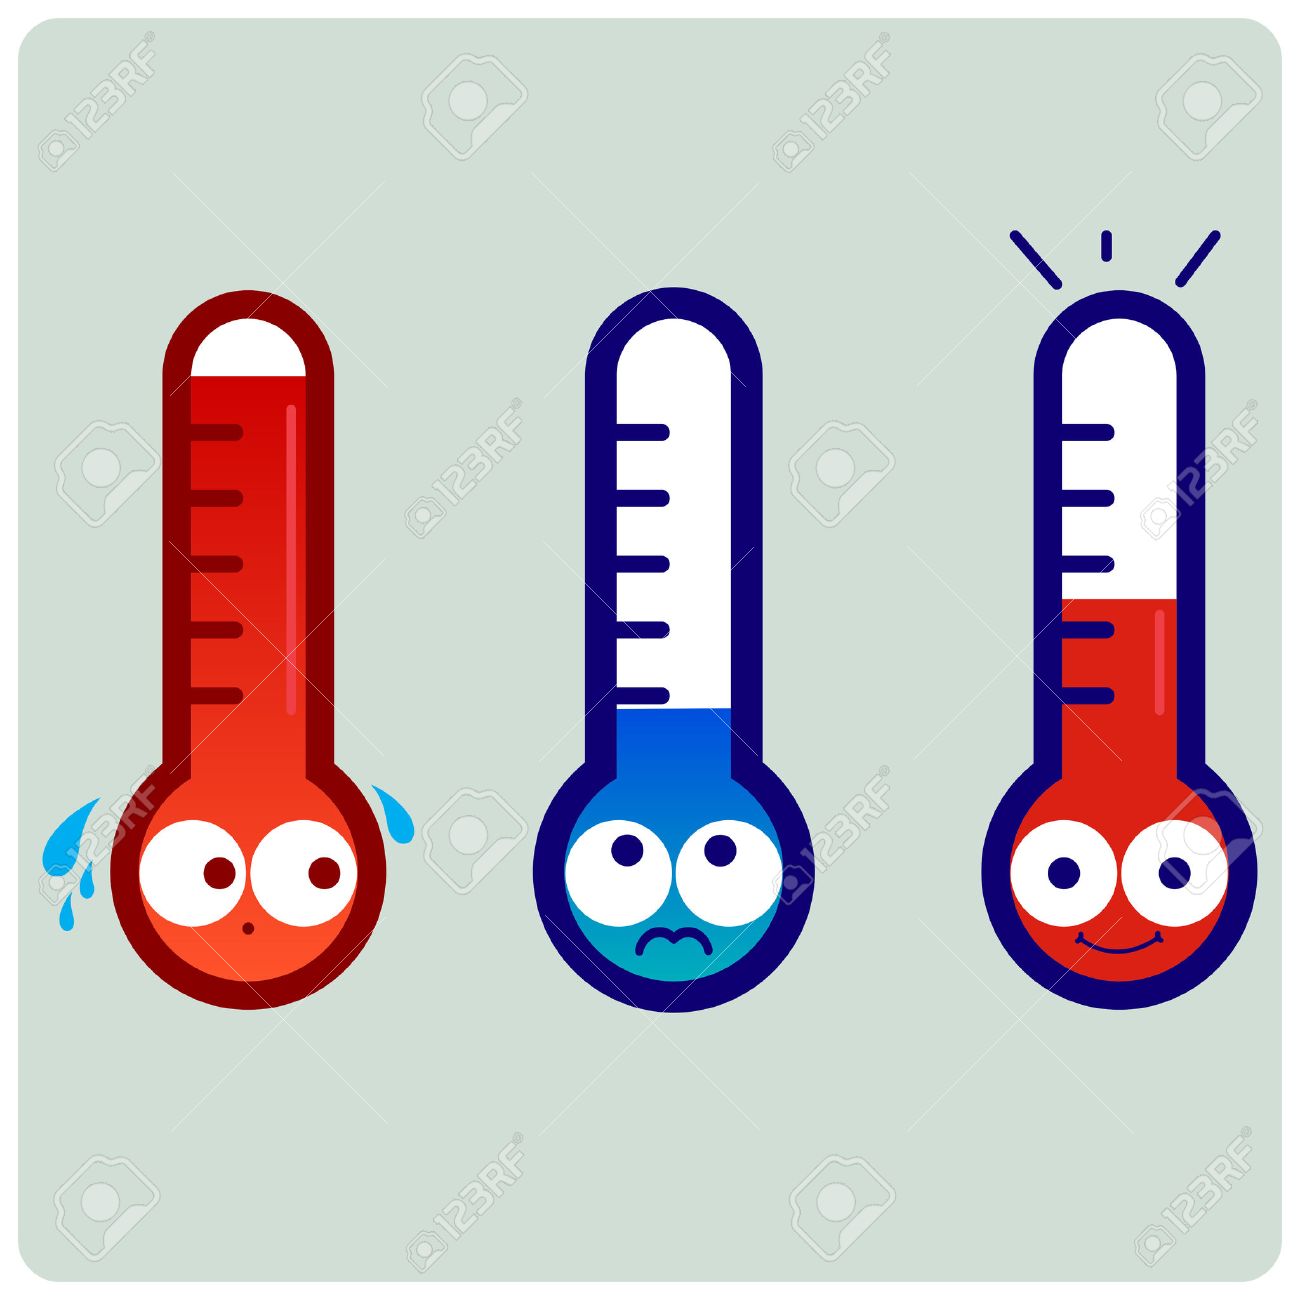 Hot and cold temperature clipart